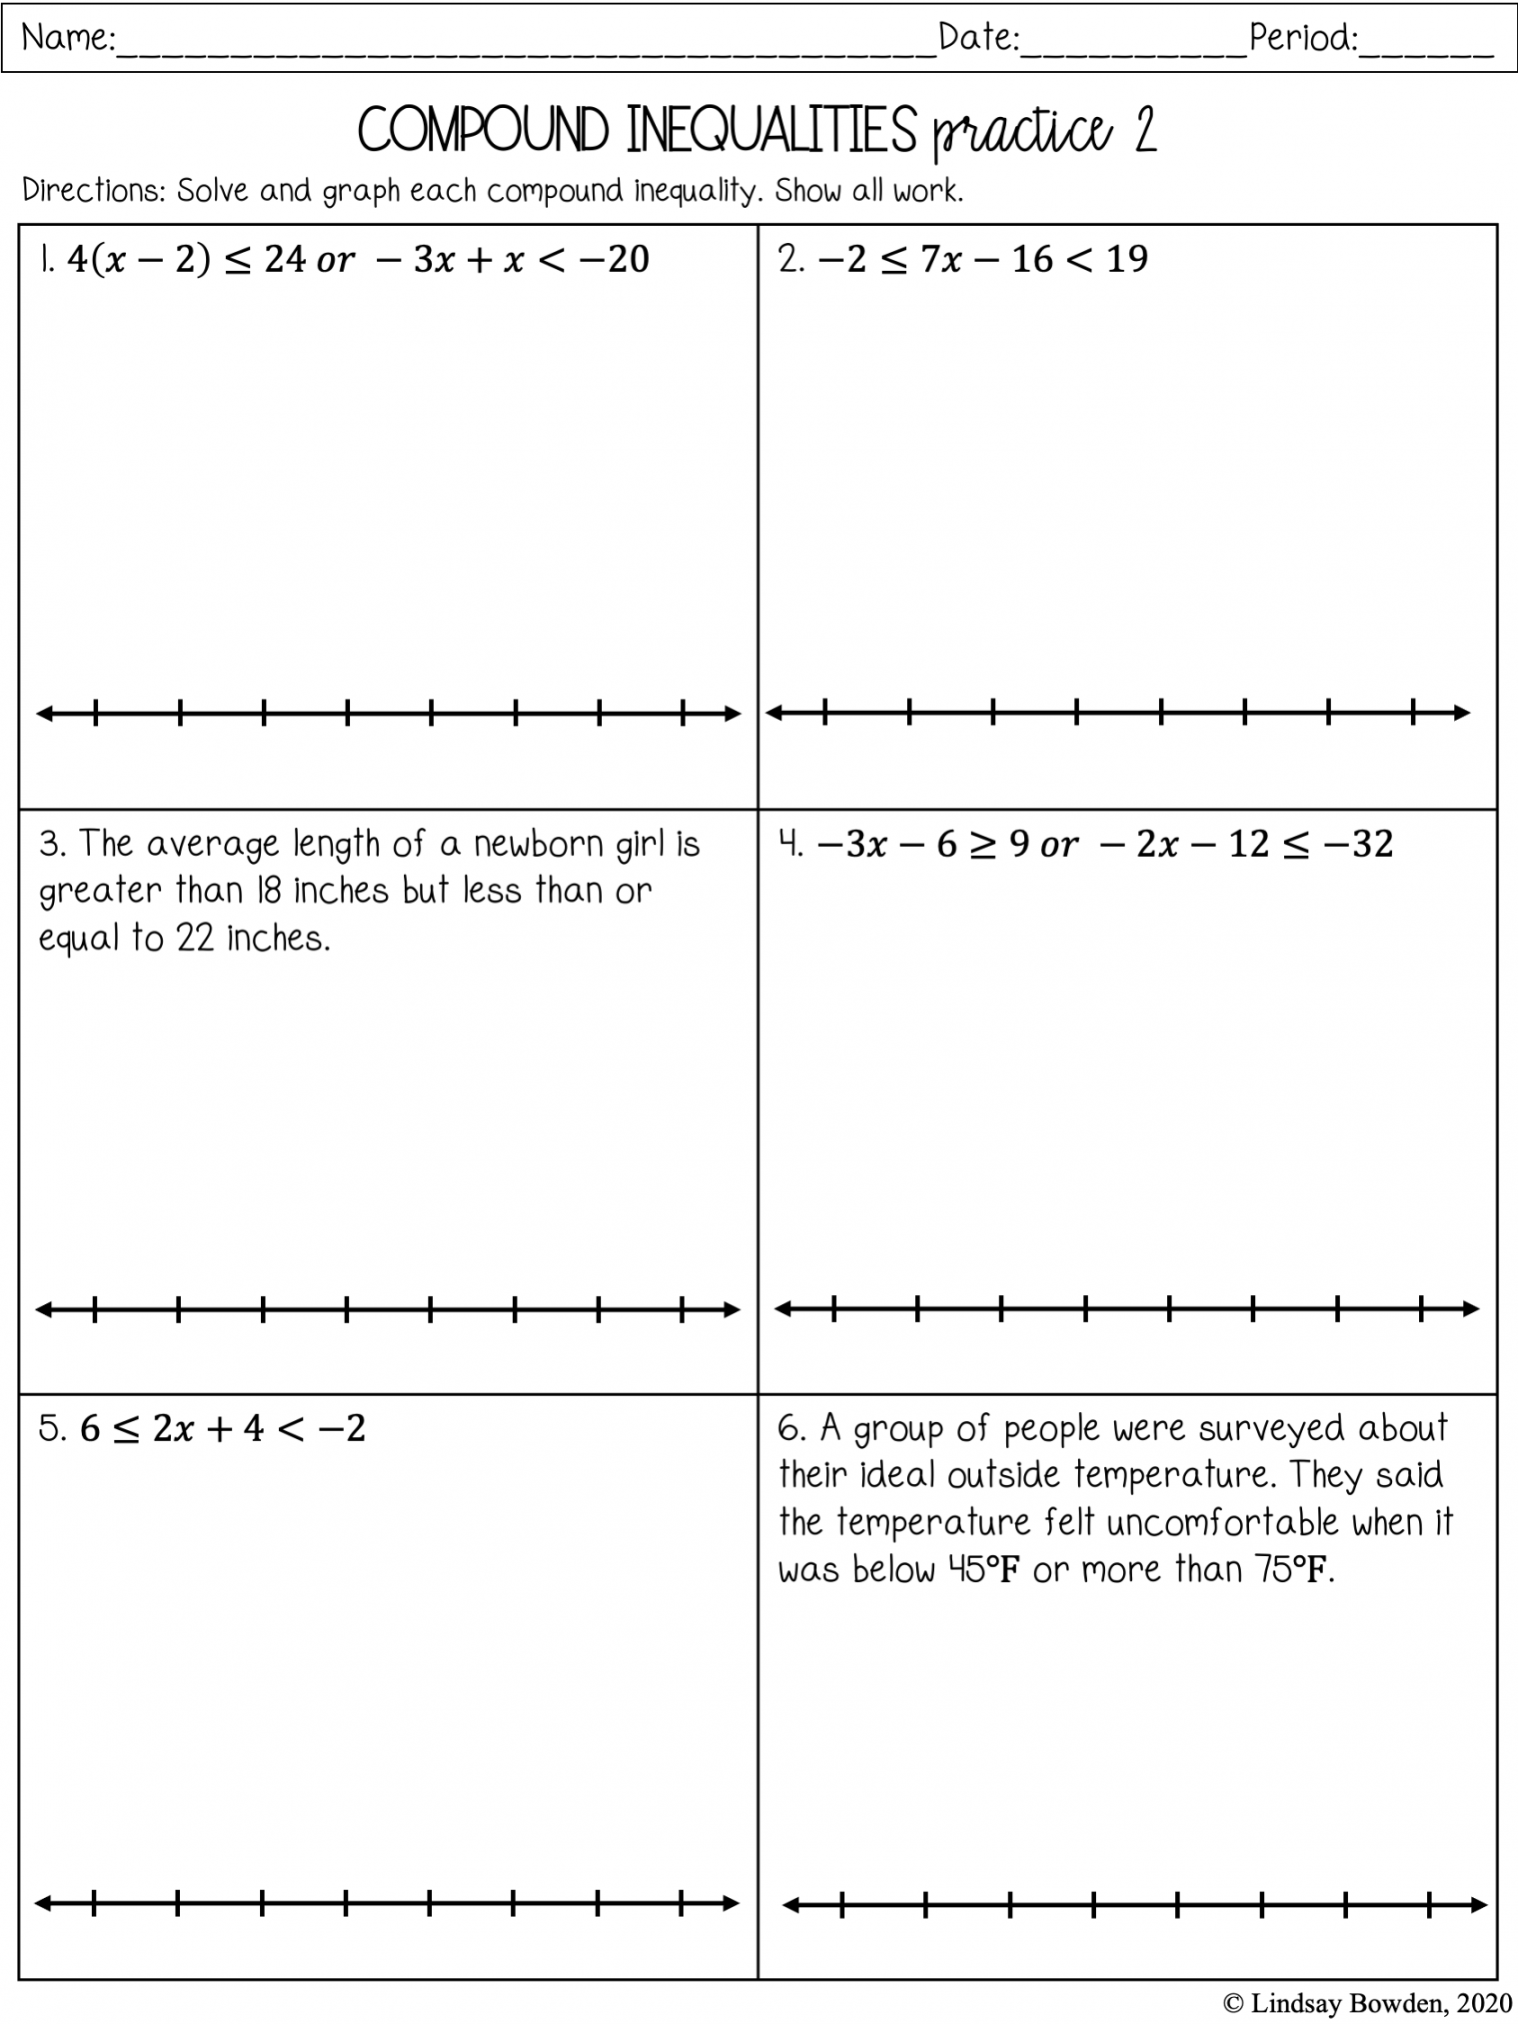 Compound Inequalities Notes and Worksheets - Lindsay Bowden